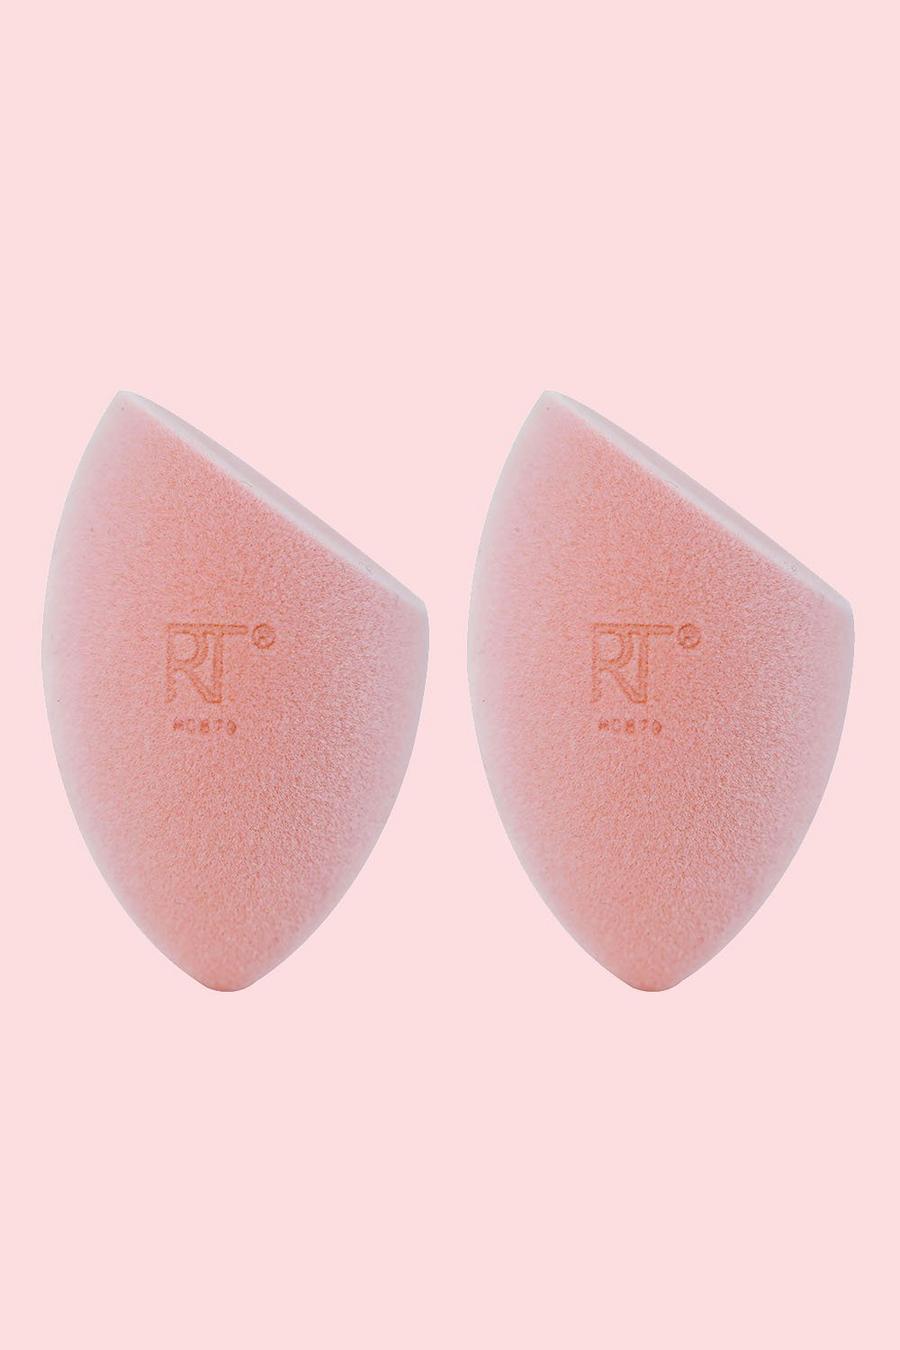 Pink rose Real Techniques 2 Pk Miracle Powder Sponge